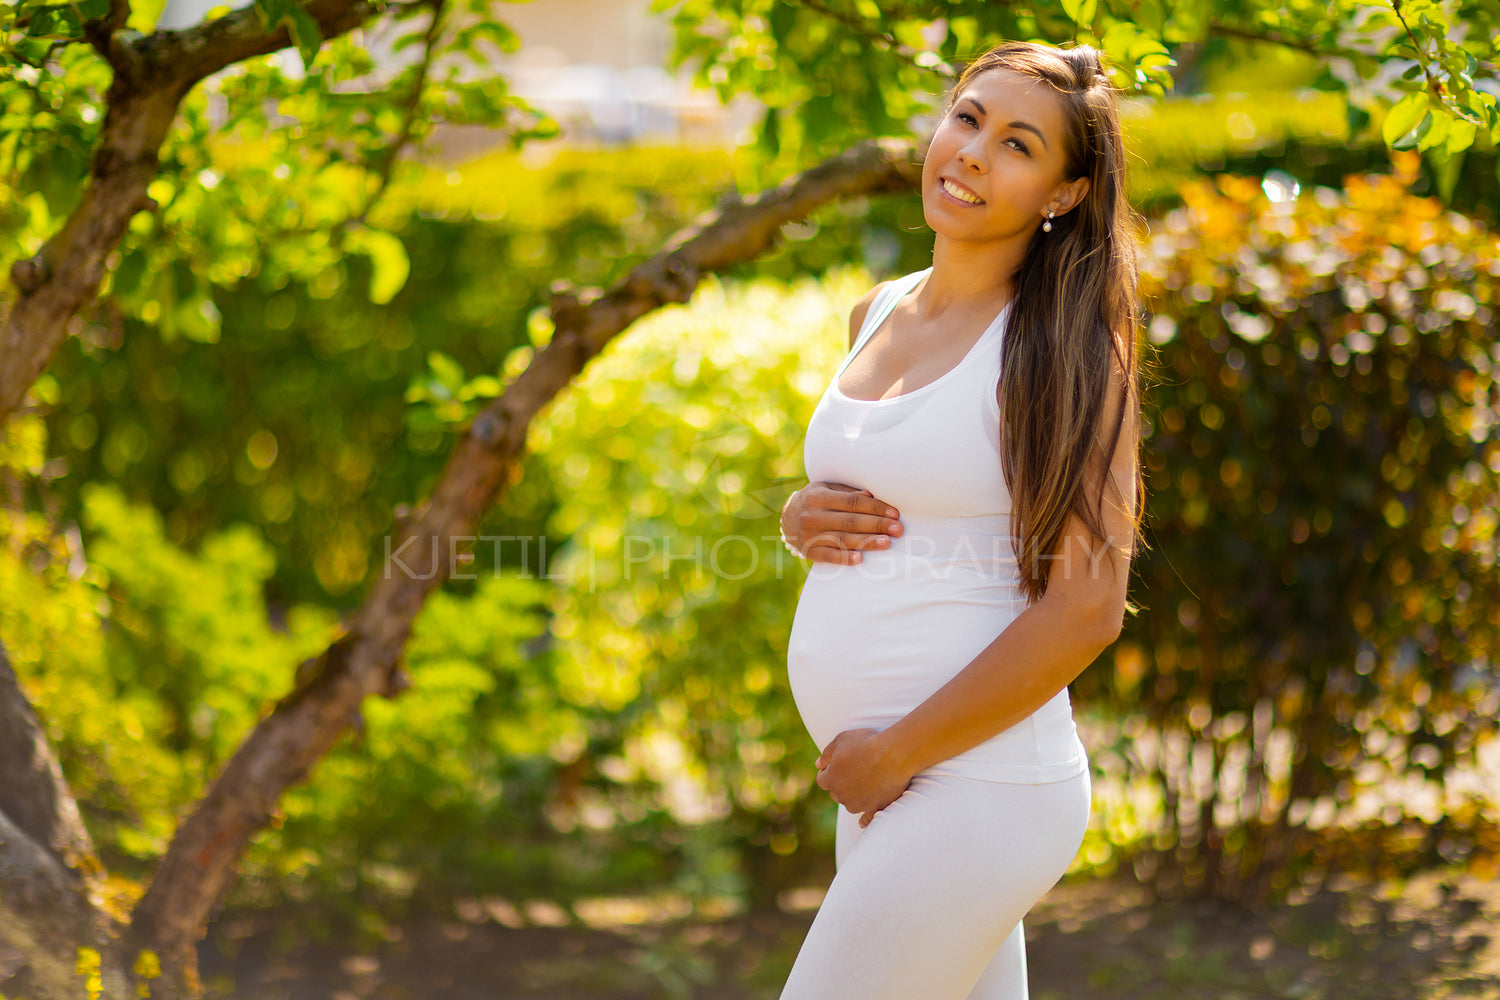 Smiling pregnant woman standing in garden holding on tummy